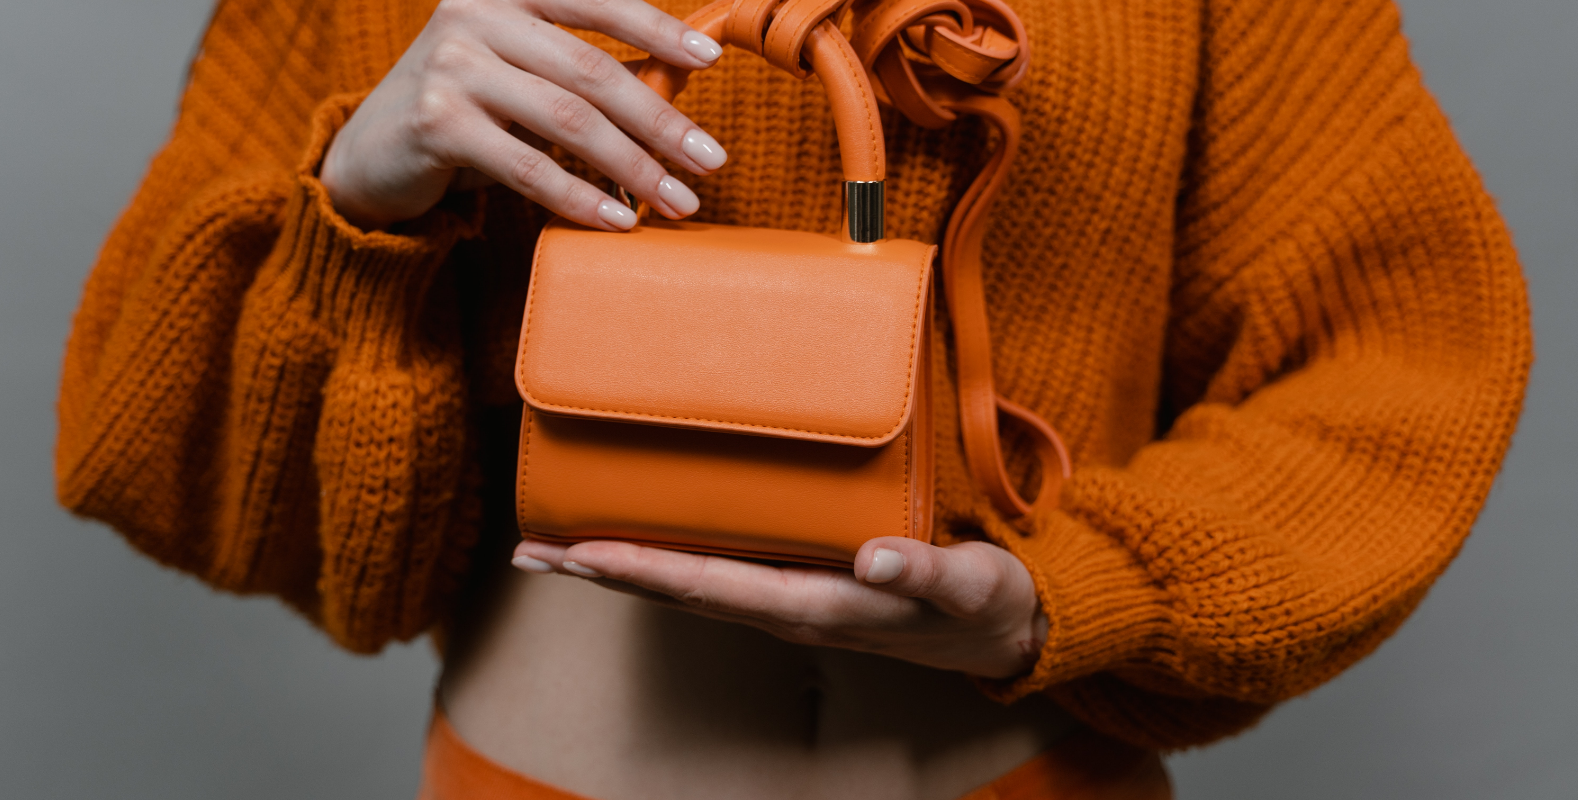 Mini Bags are the Next Big Trend